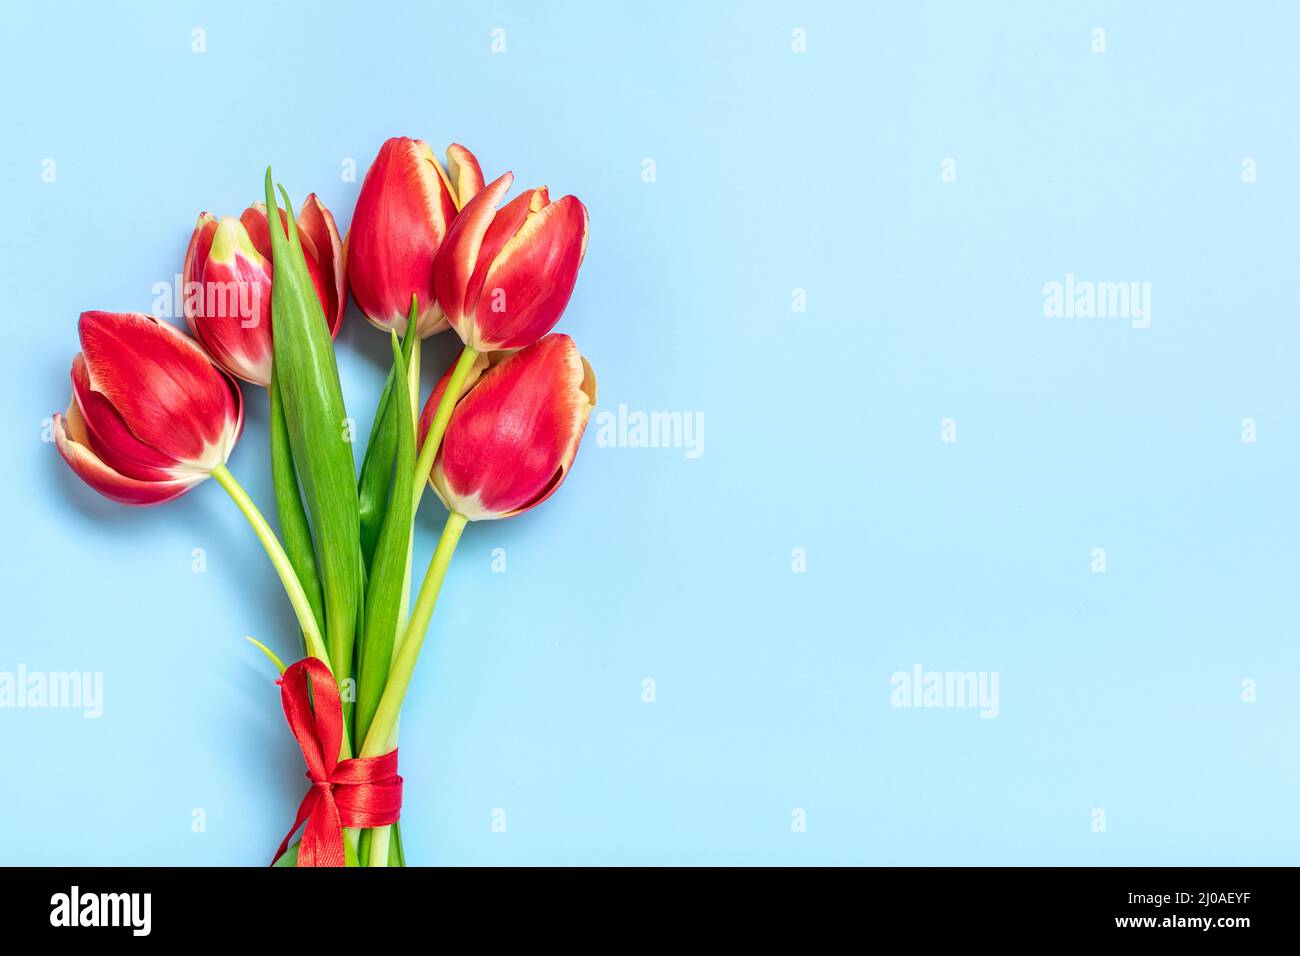 Painted Red Tulips in Vase with Calligraphy Greeting Card Tulip Thank You Greeting Card